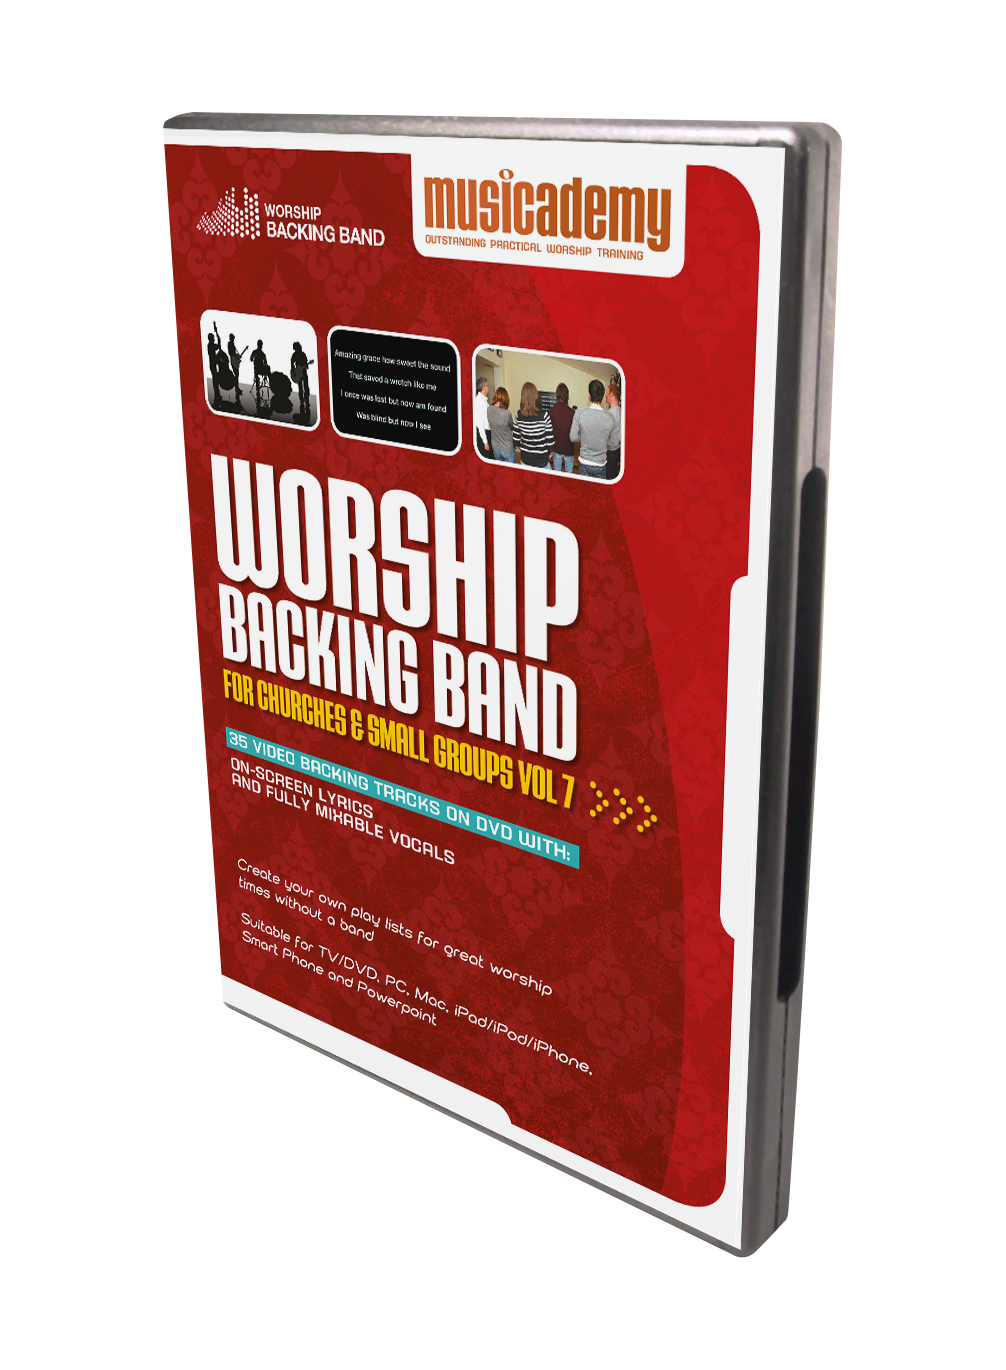 Worship Backing Band DVD Volume 7 available now